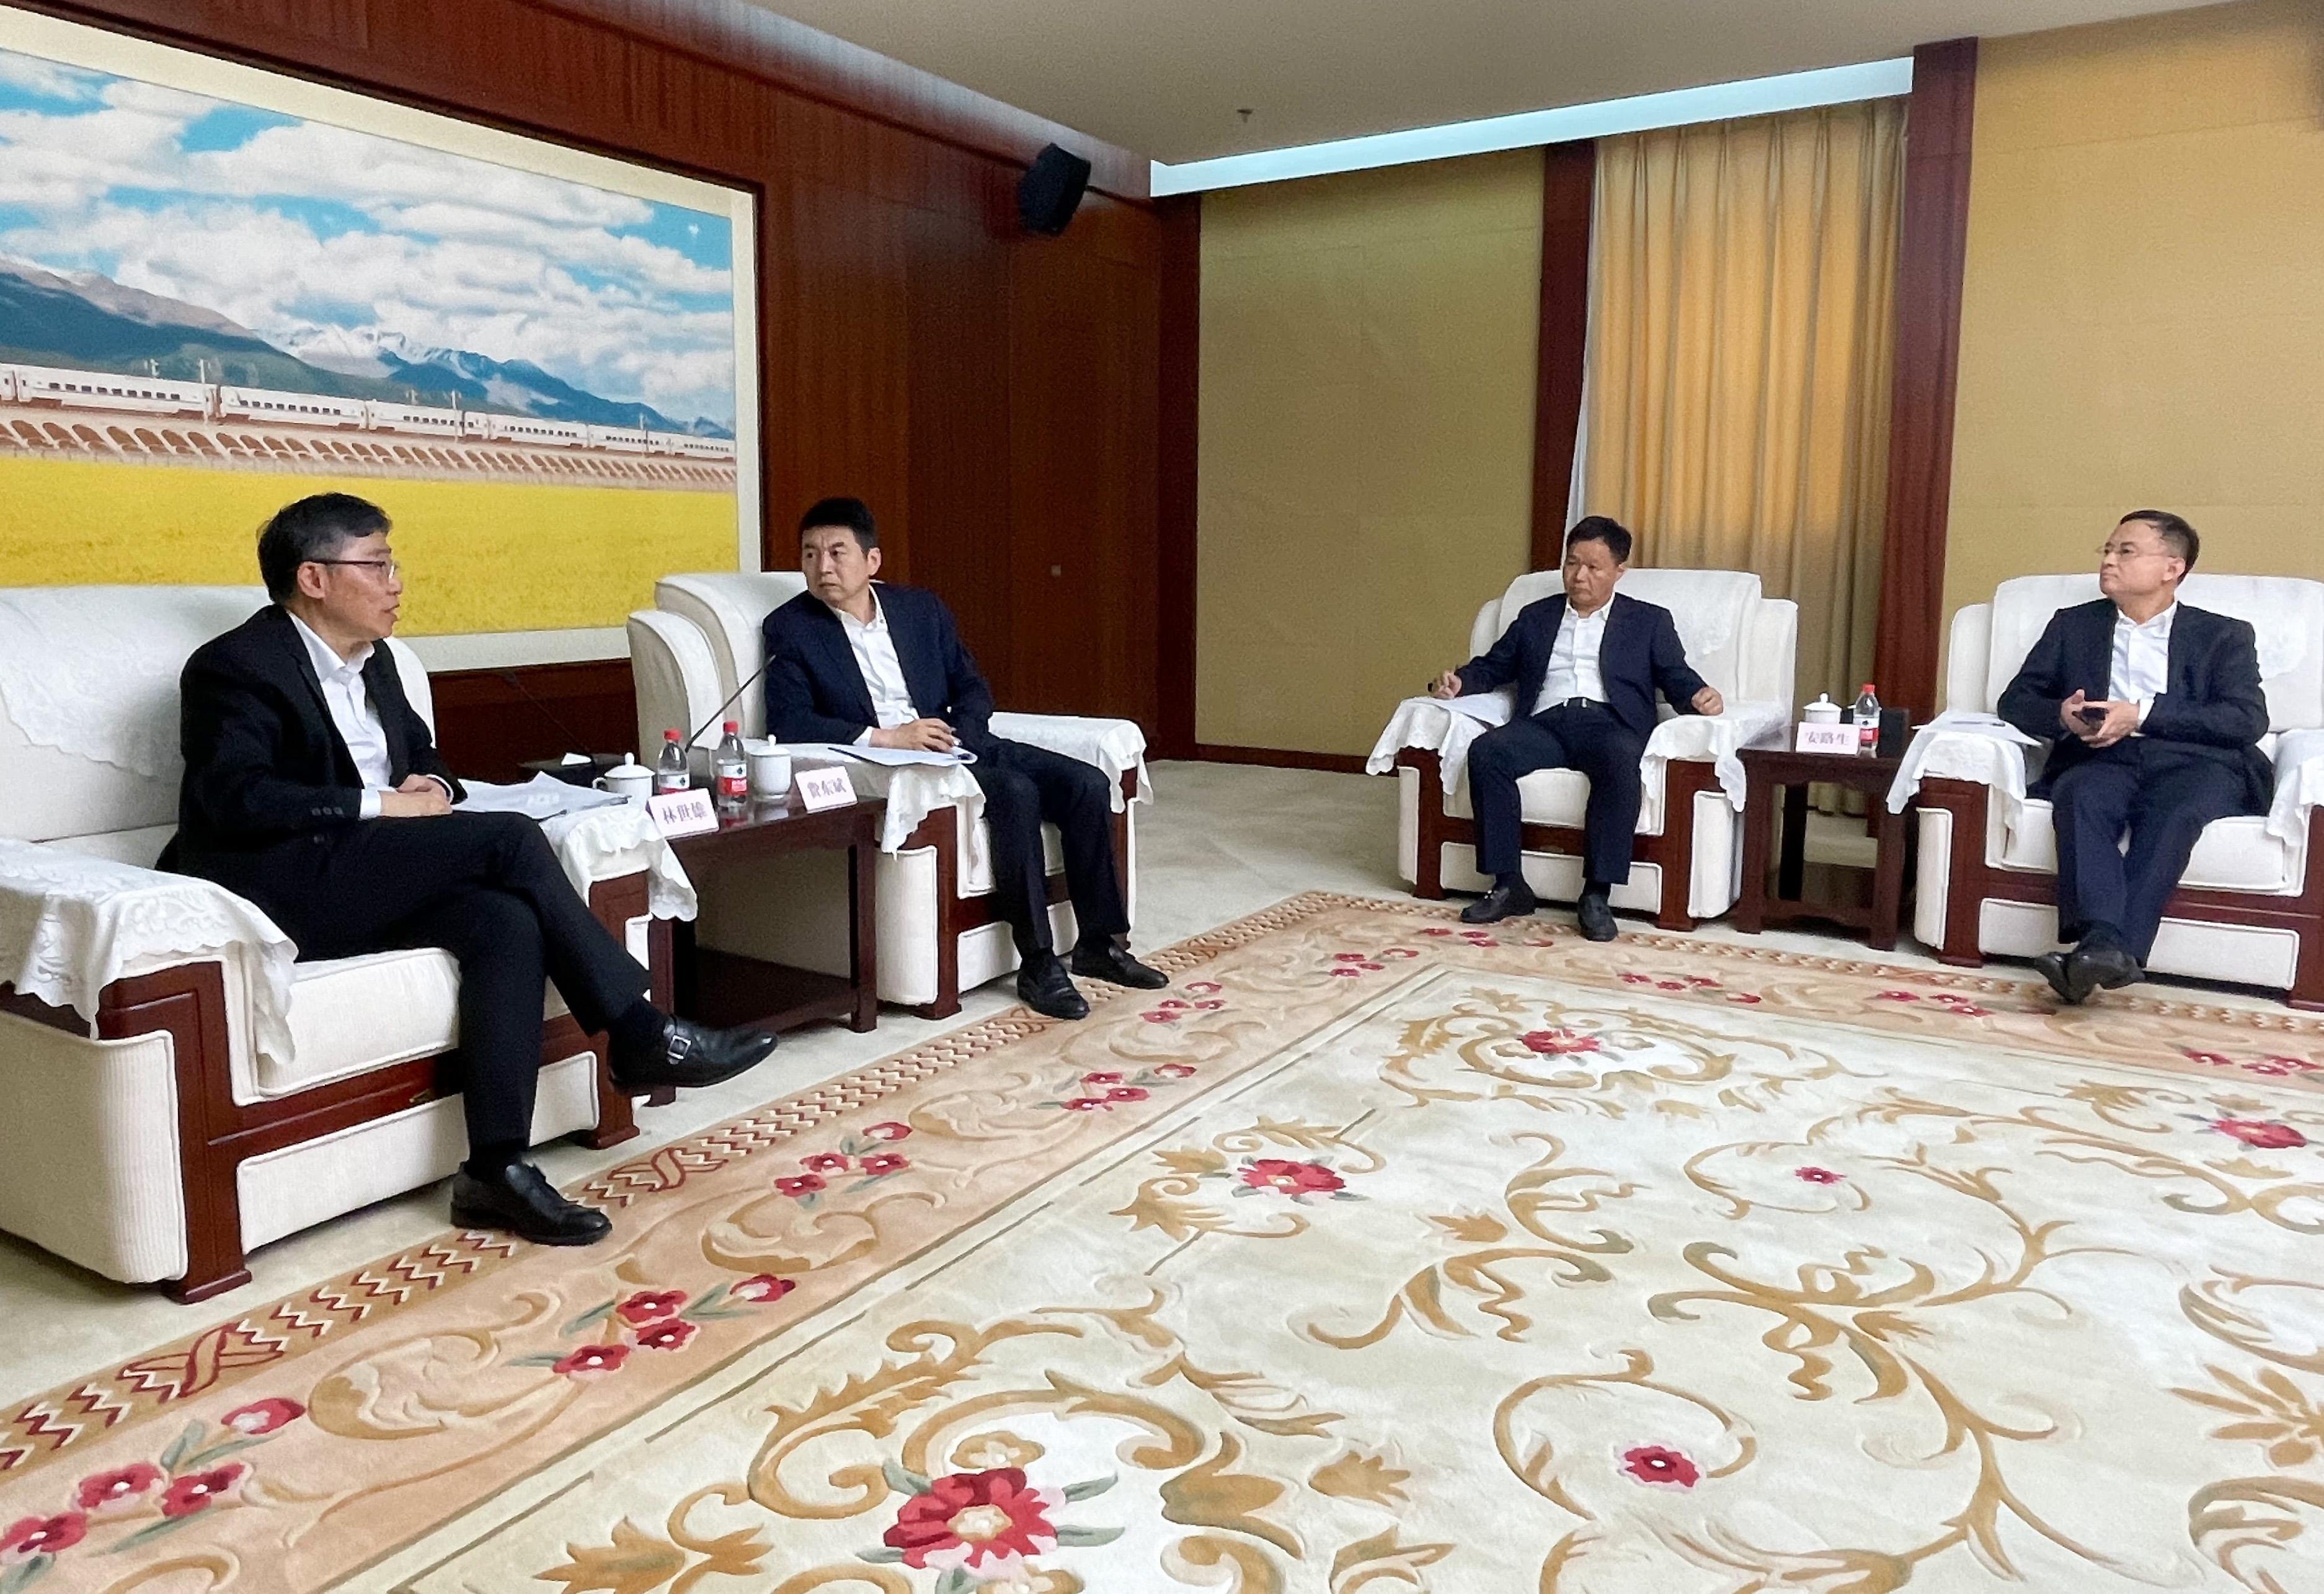 The Secretary for Transport and Logistics, Mr Lam Sai-hung (first left), today (April 20) meets with the Administrator of the National Railway Administration, Mr Fei Dongbin (second left), and other representatives of the Administration in Beijing.